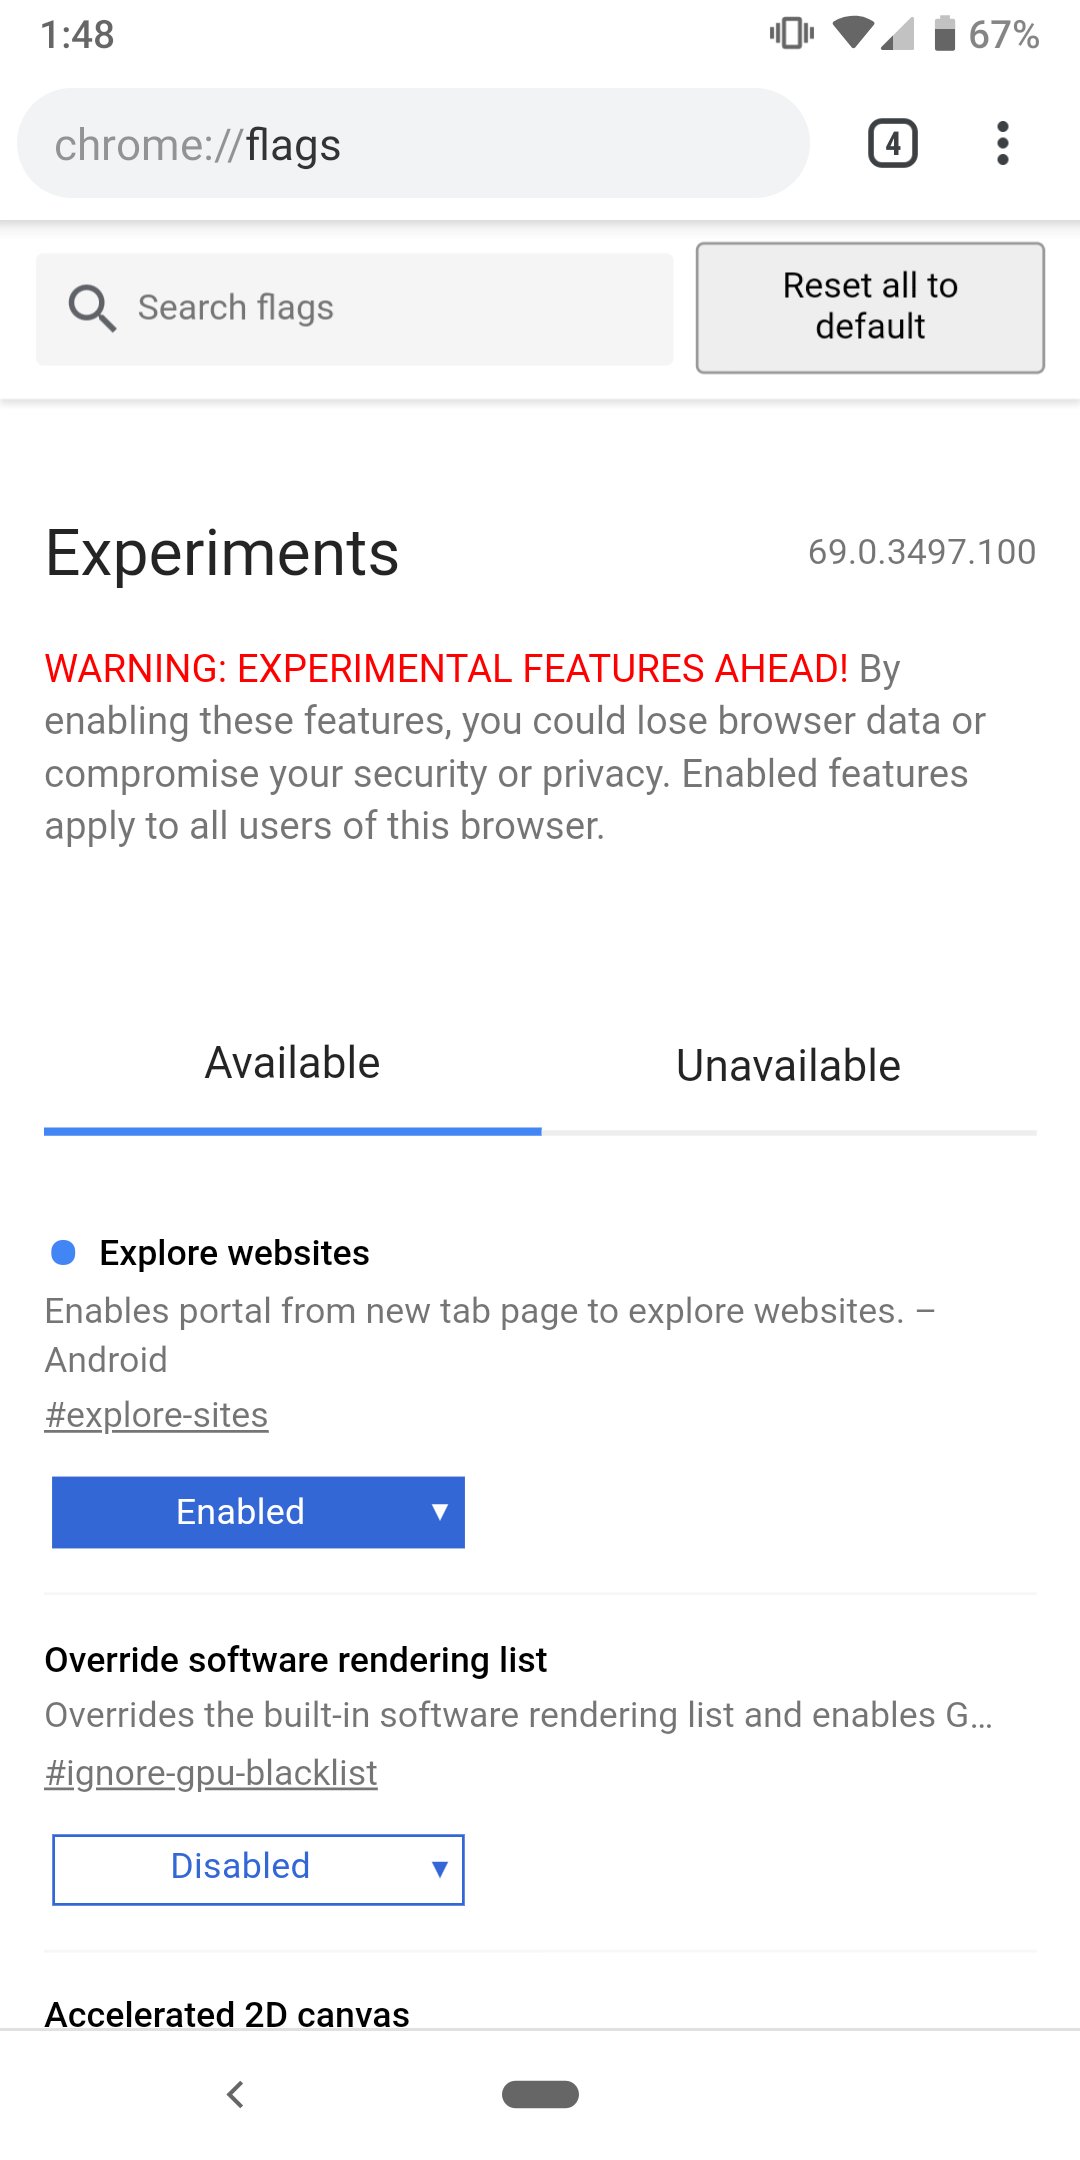 Google Tests New 'Explore' UI for Android Chrome New Tab